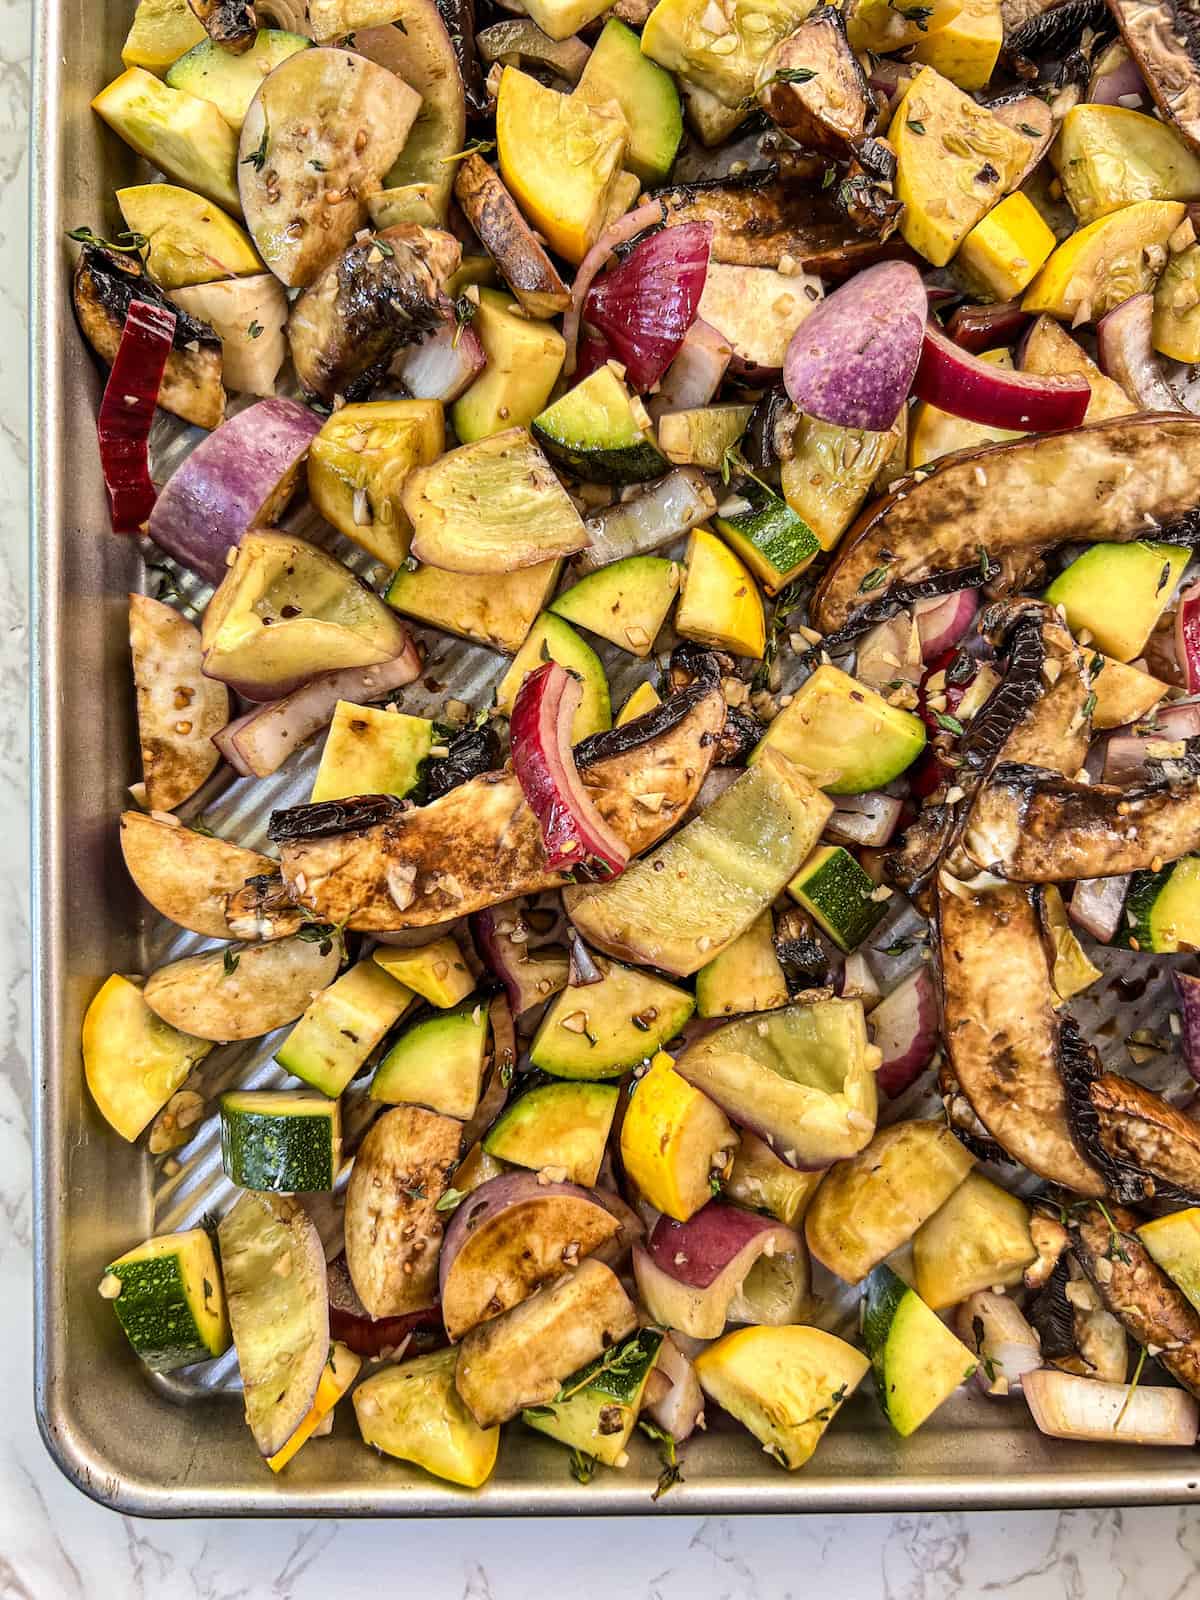 Balsamic marinated vegetables spread out on a sheet pan.